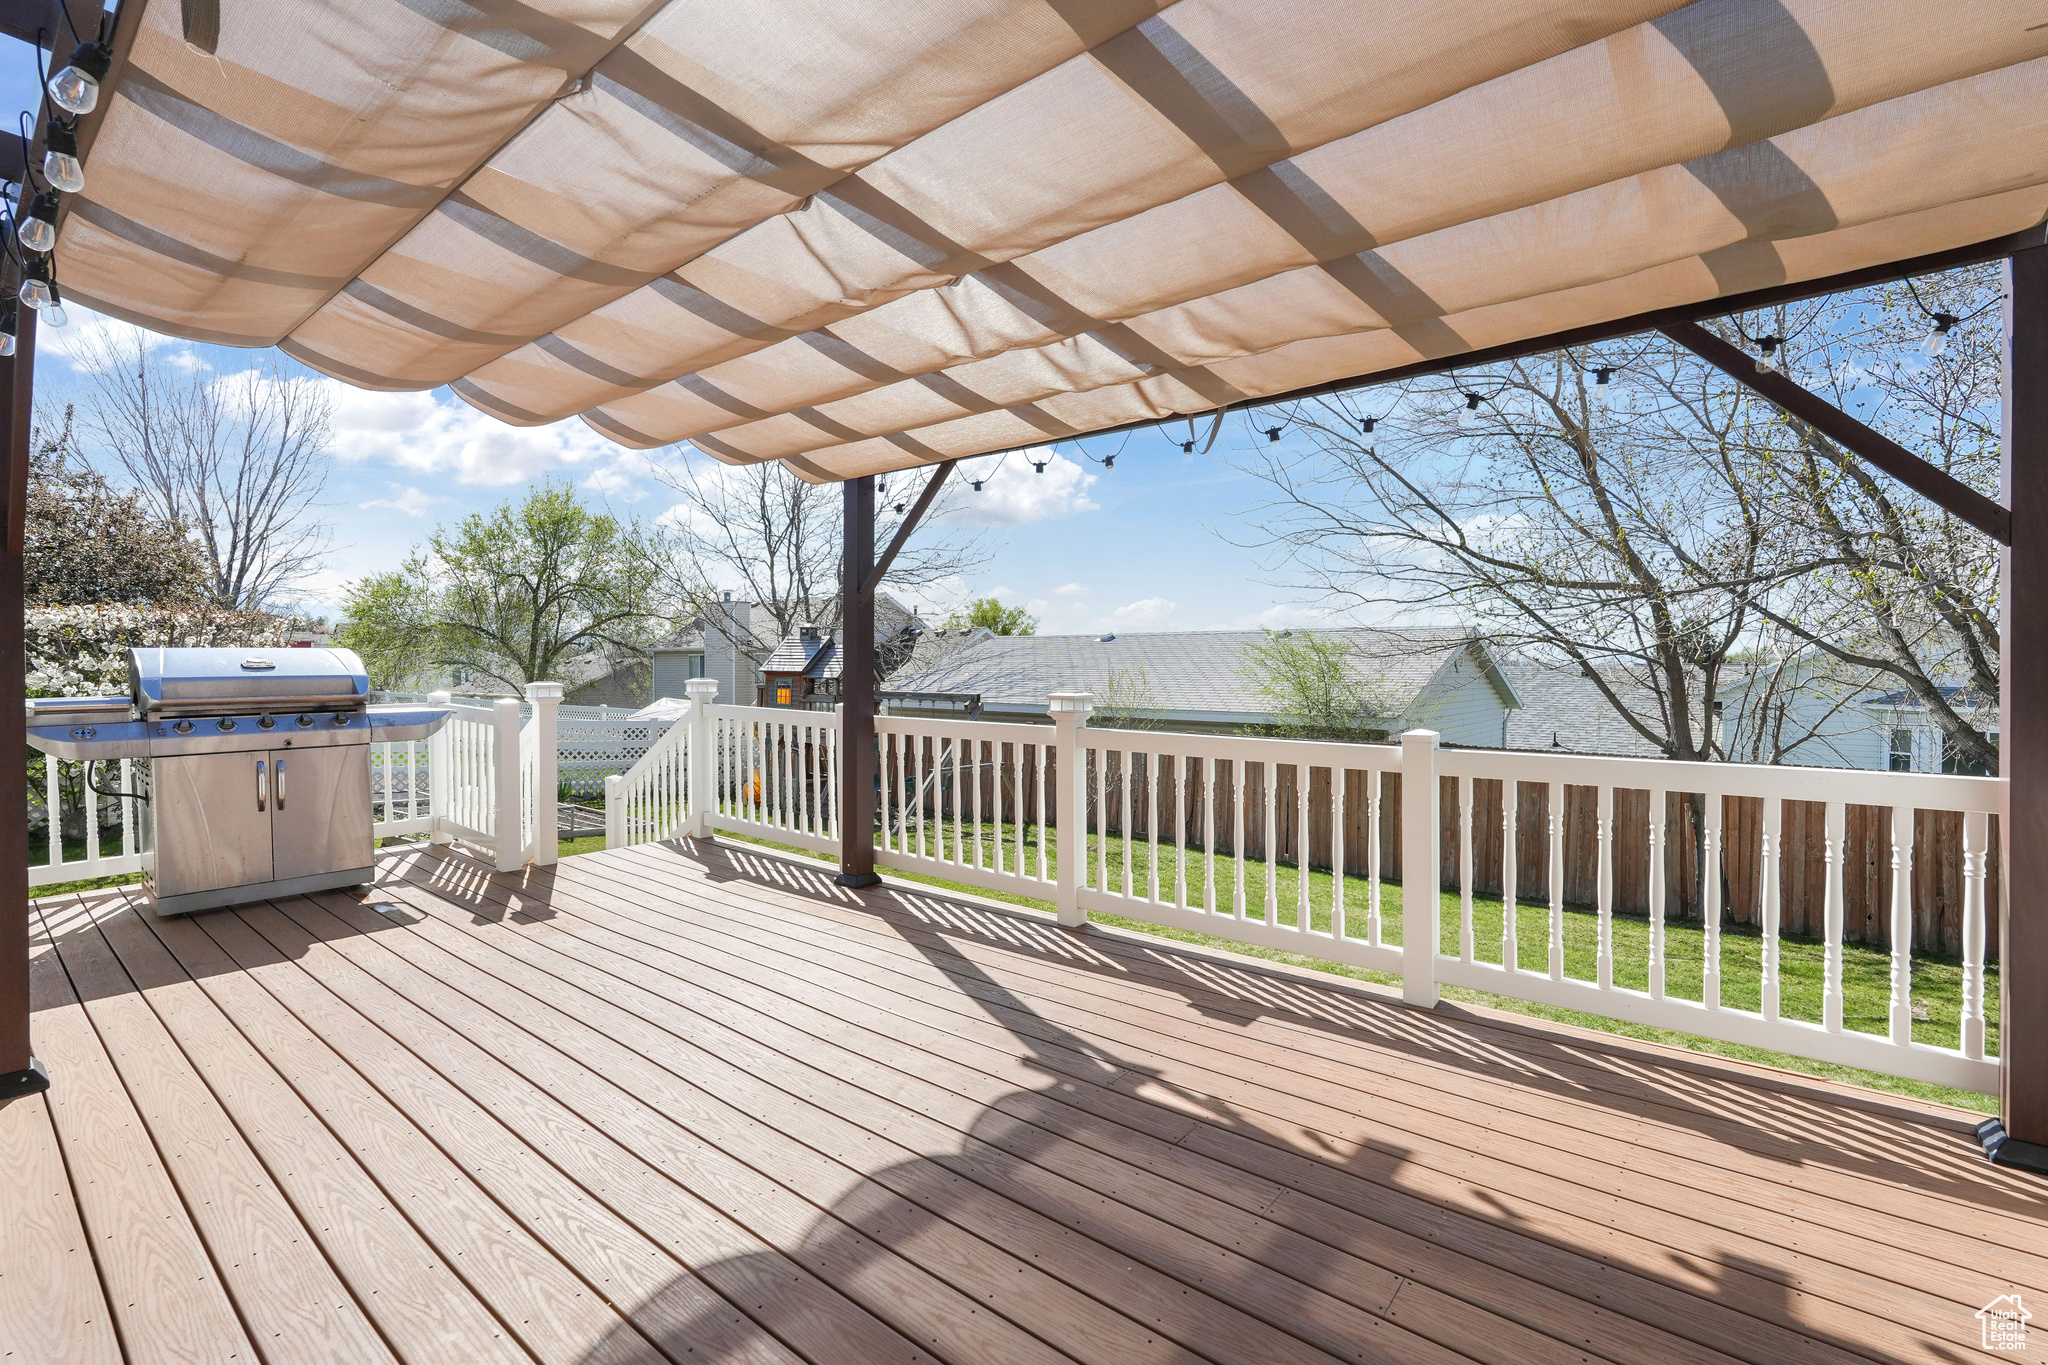 Wooden terrace featuring a yard, a pergola, and grilling area